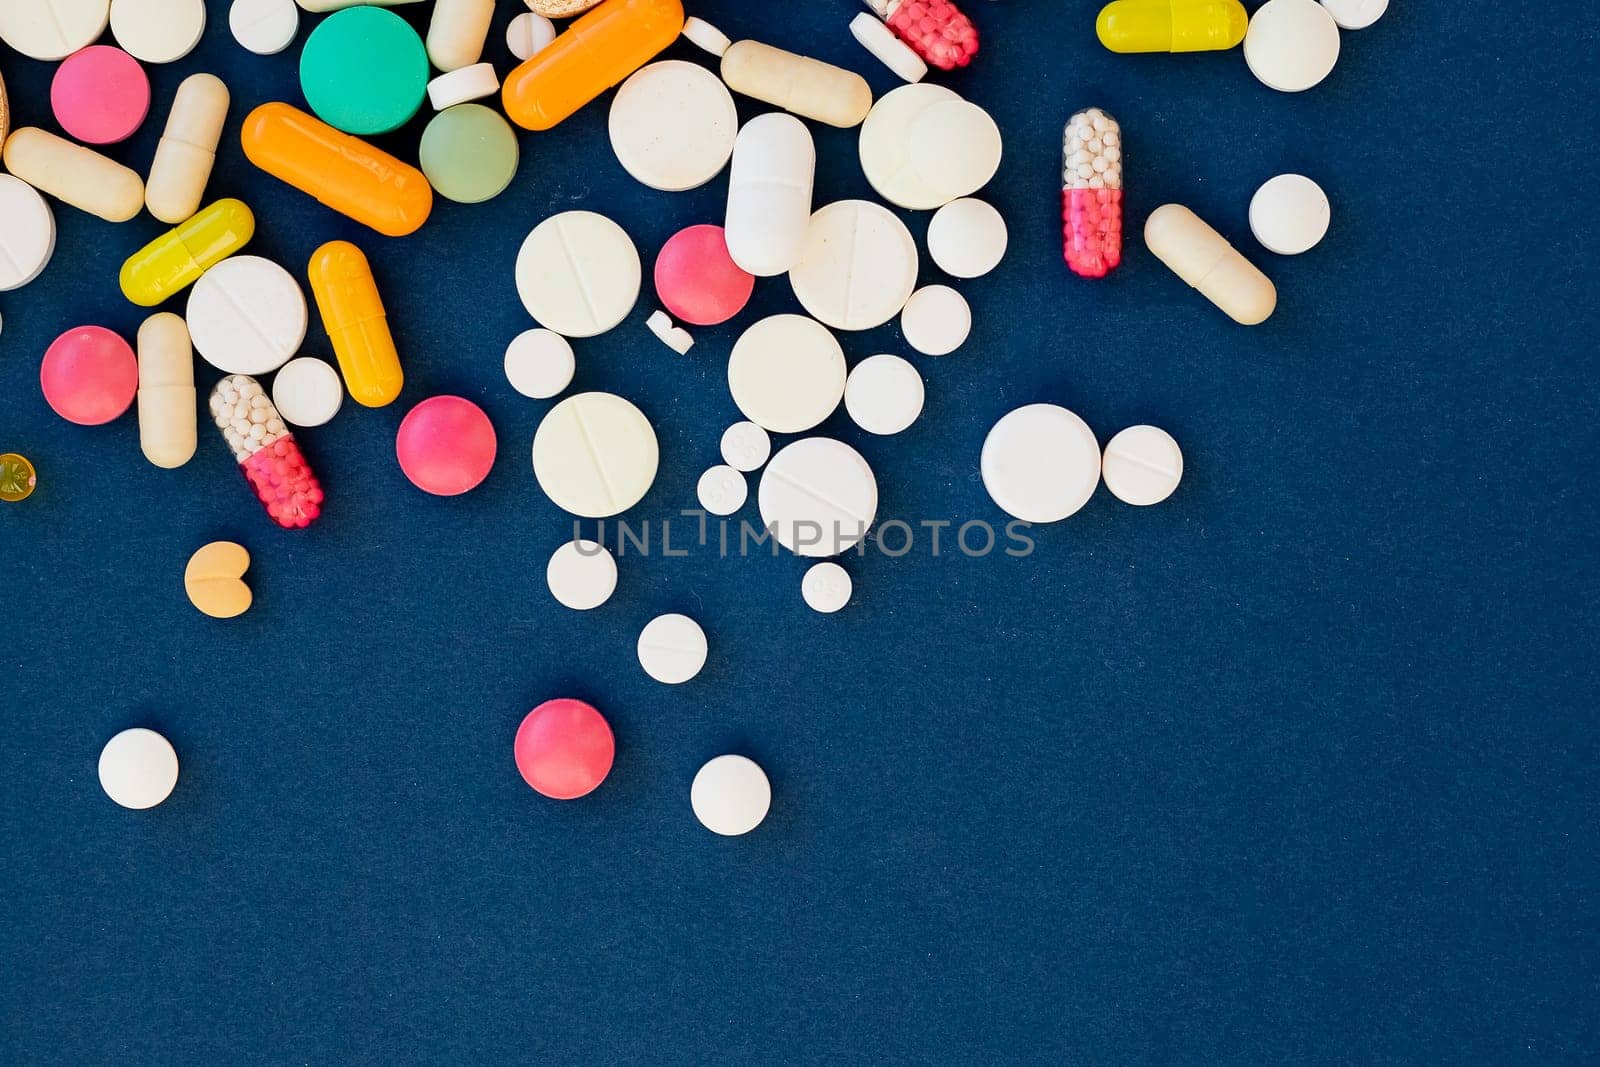 Assorted pharmaceutical colorful pills. Prevention, cure of influenza, coronavirus,antibiotics pills medicine. vitamins, tablets on blue background. medical healthcare, protection concept banner by YuliaYaspe1979